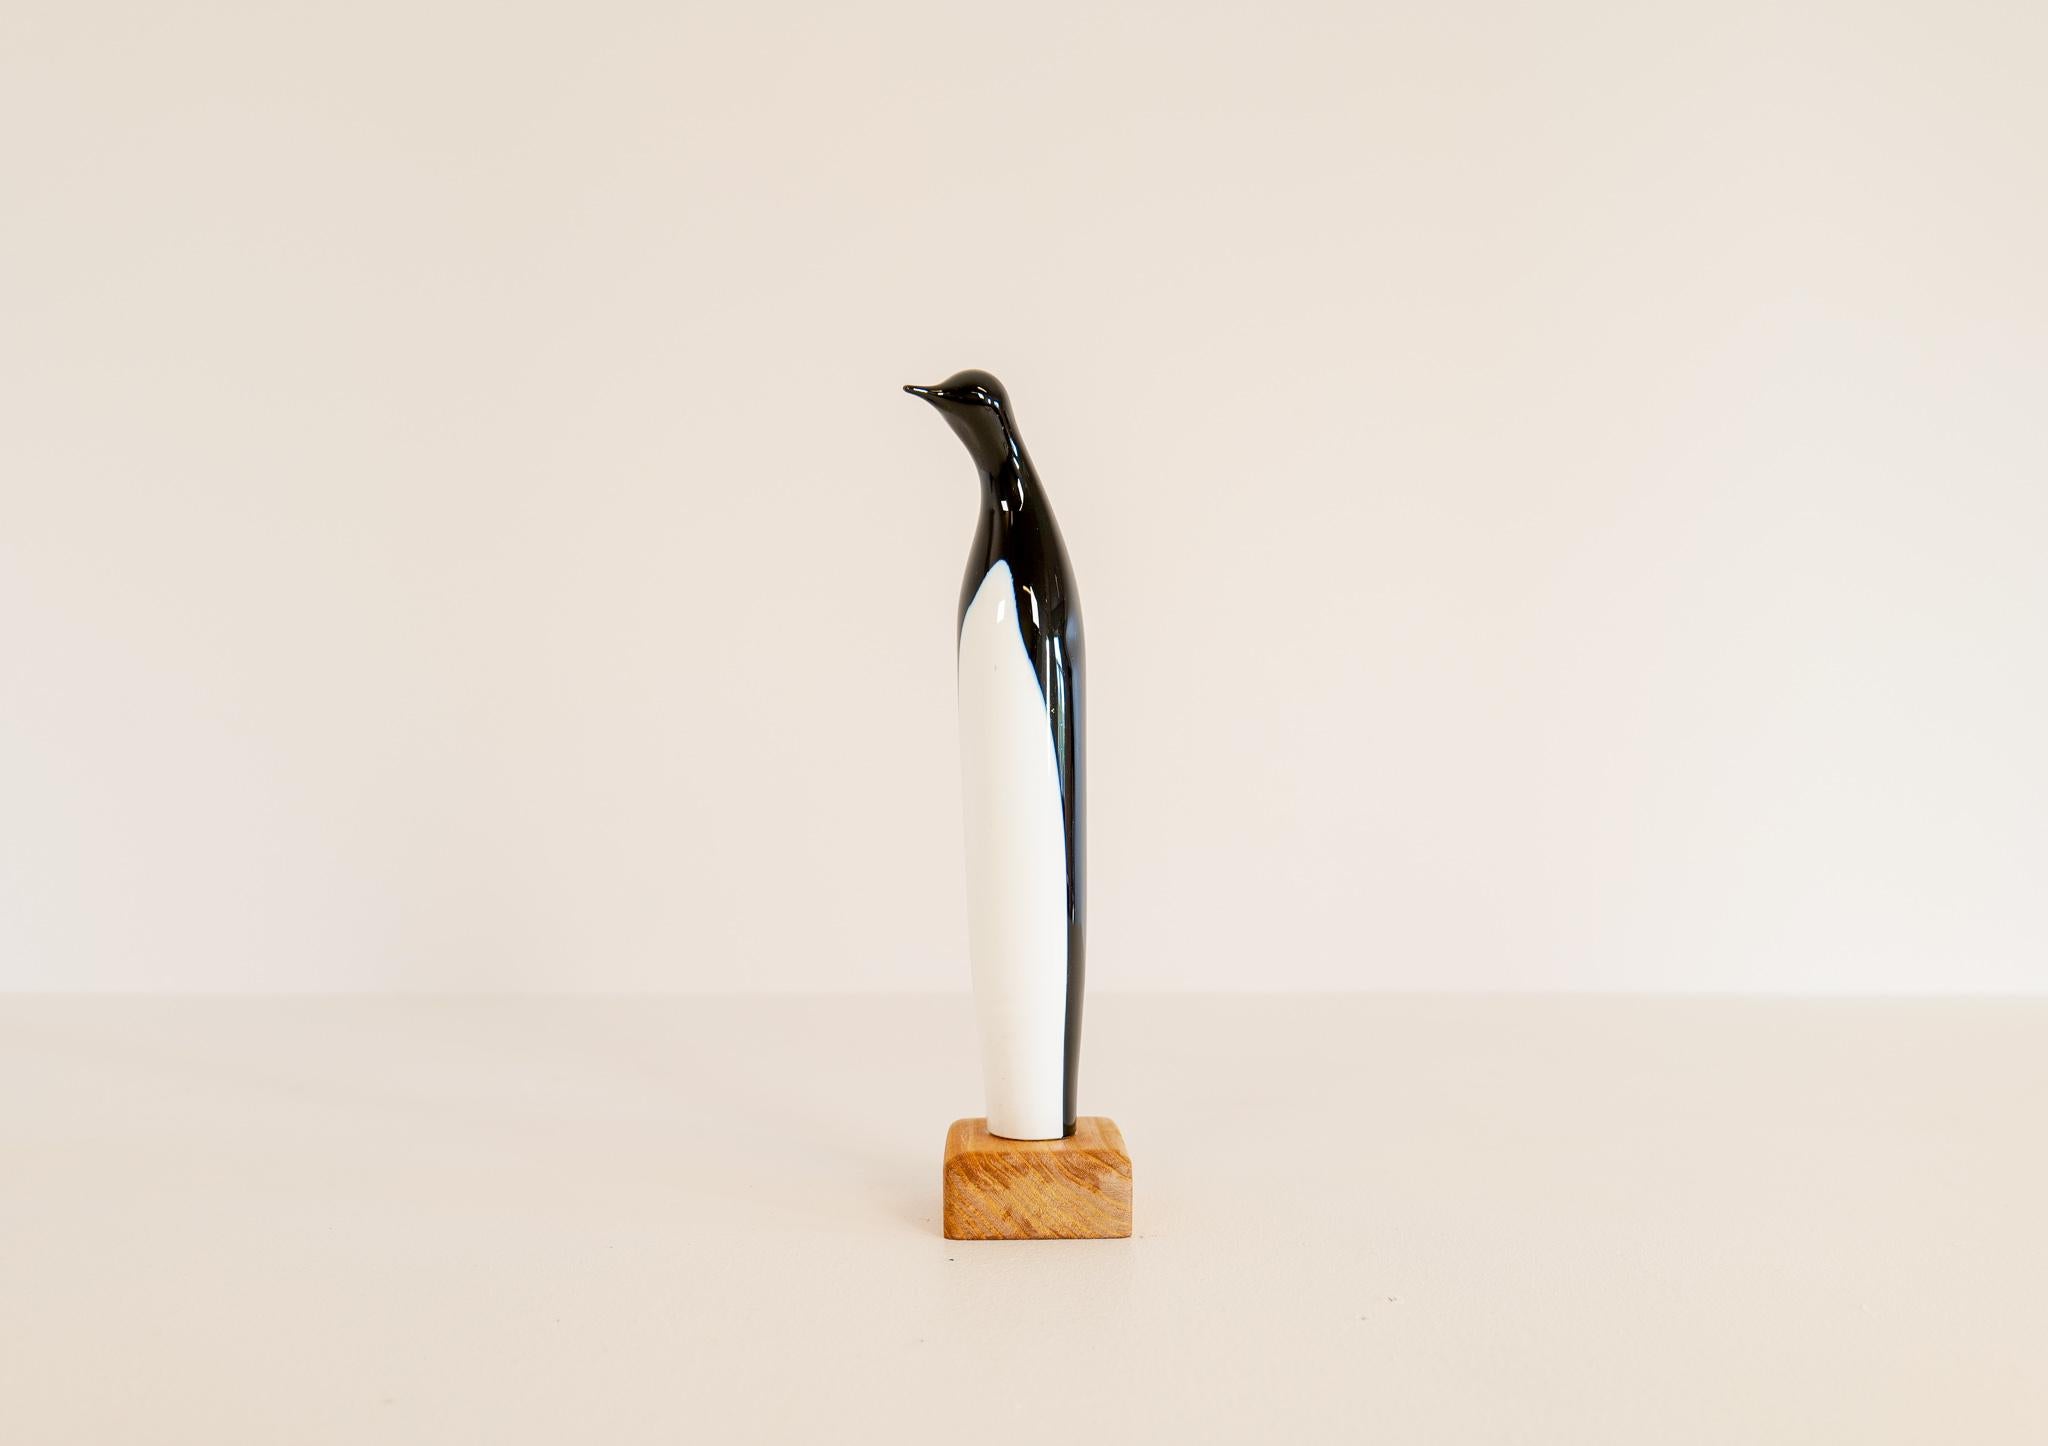 This art glass piece the penguin was produced in Sweden at the Kosta factory. Designed by Vicke Lindstrand.
The penguin is created in glass mounted on a wooden base. The line of the penguin is genially great and works perfect with the black and